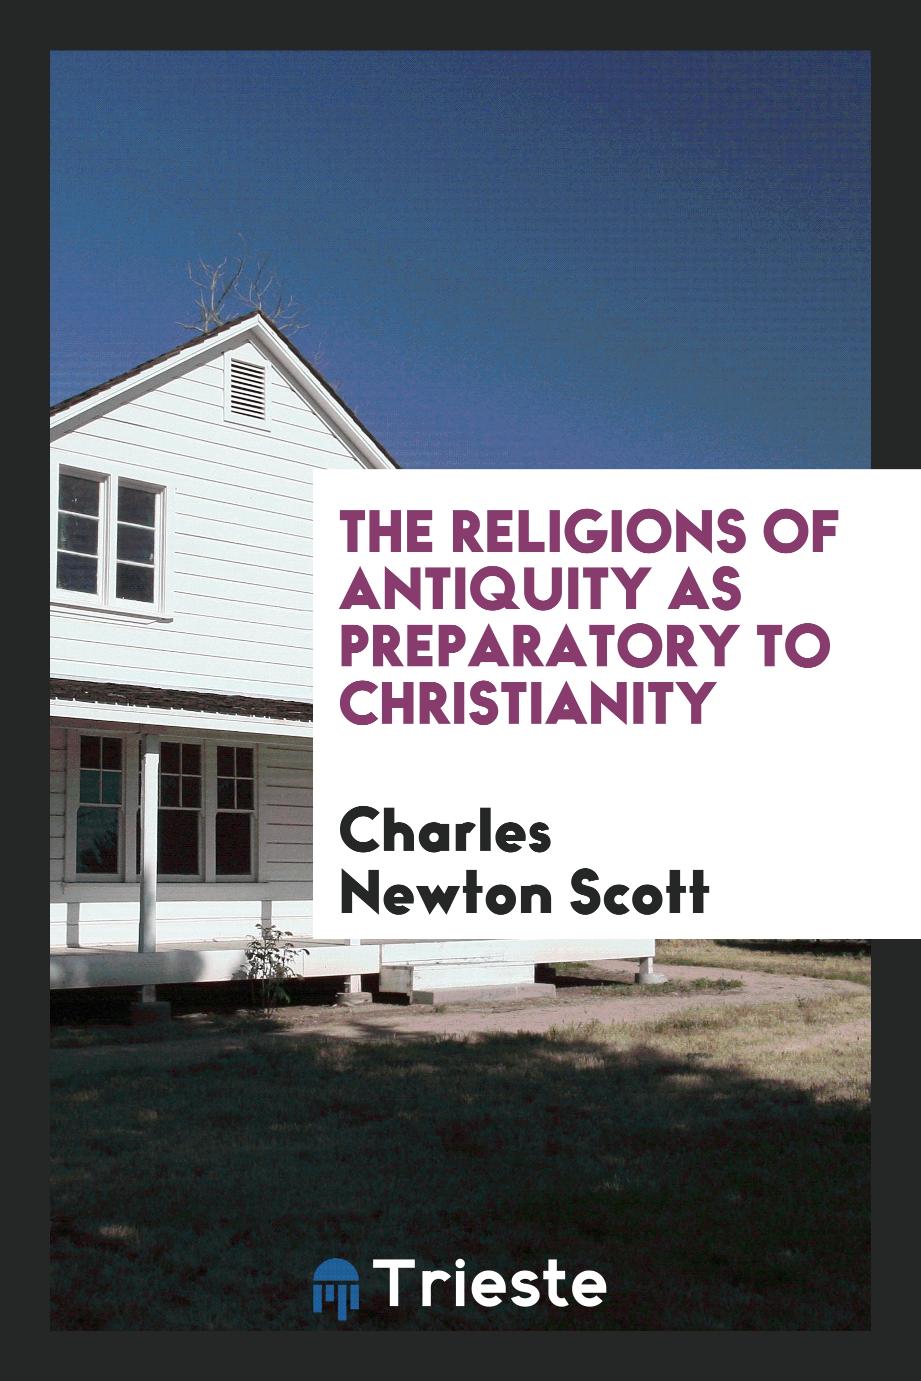 The religions of antiquity as preparatory to Christianity